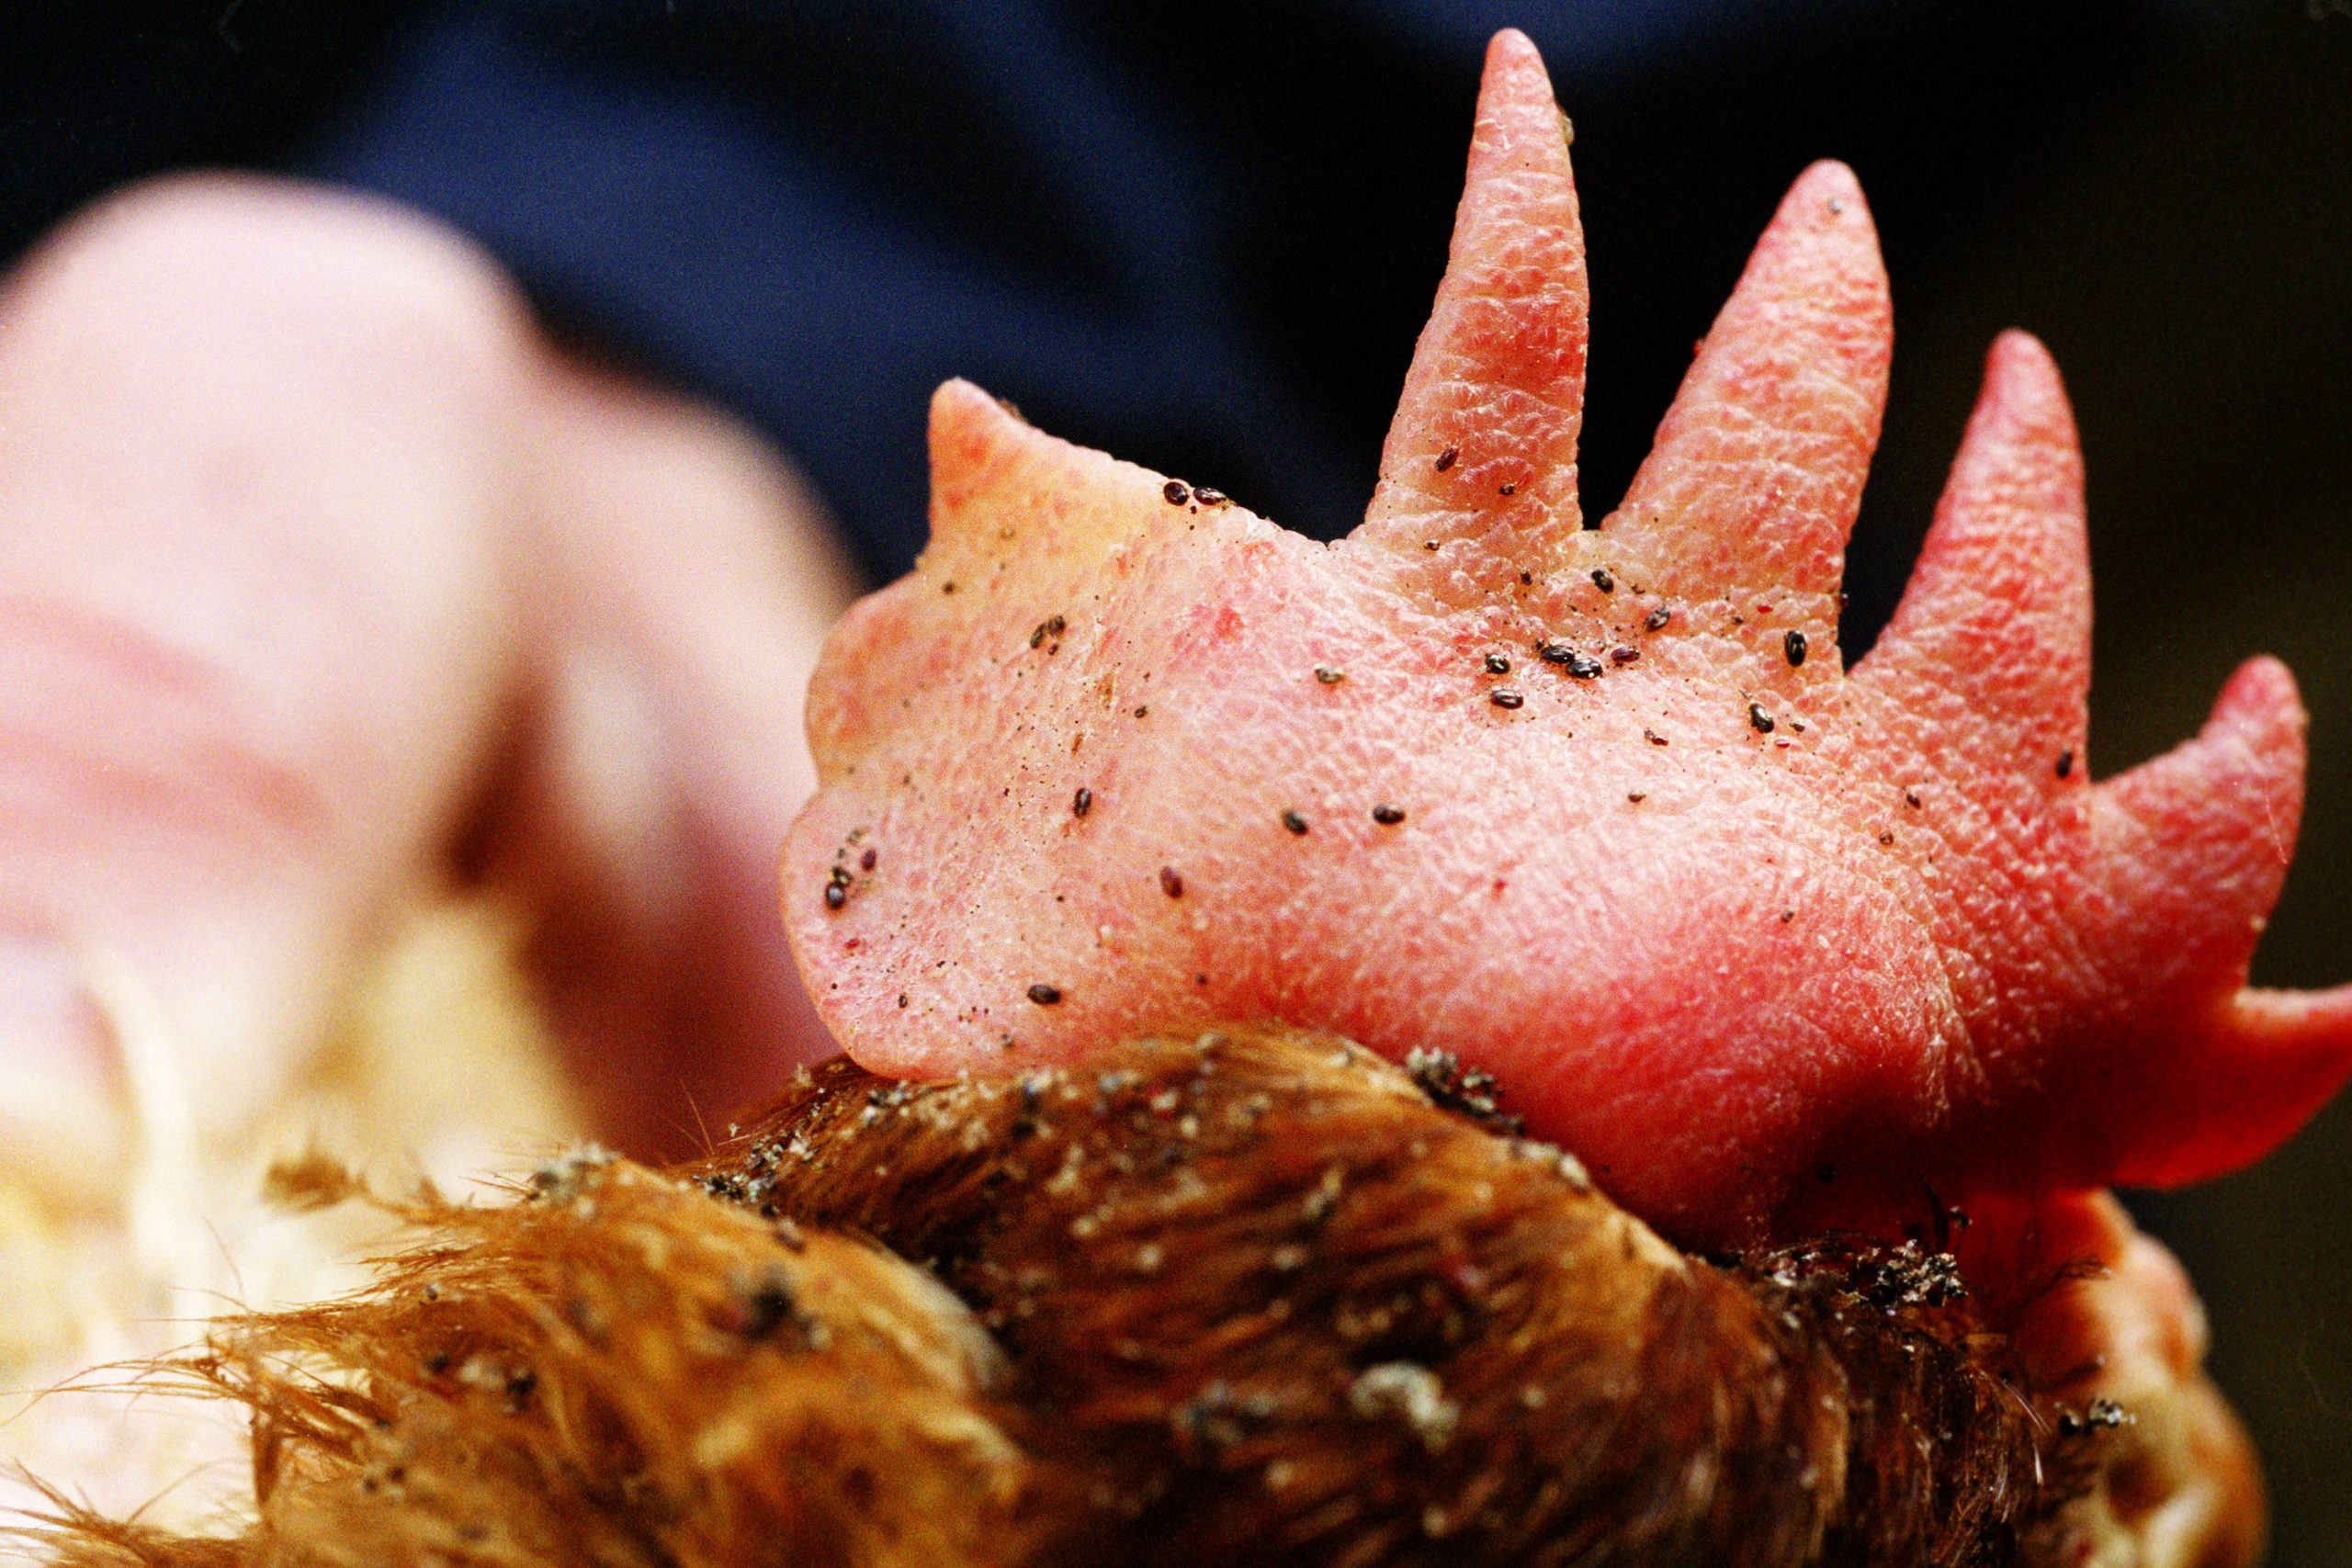 Phytogenics against red mite in poultry. Photo: Van Assendelft